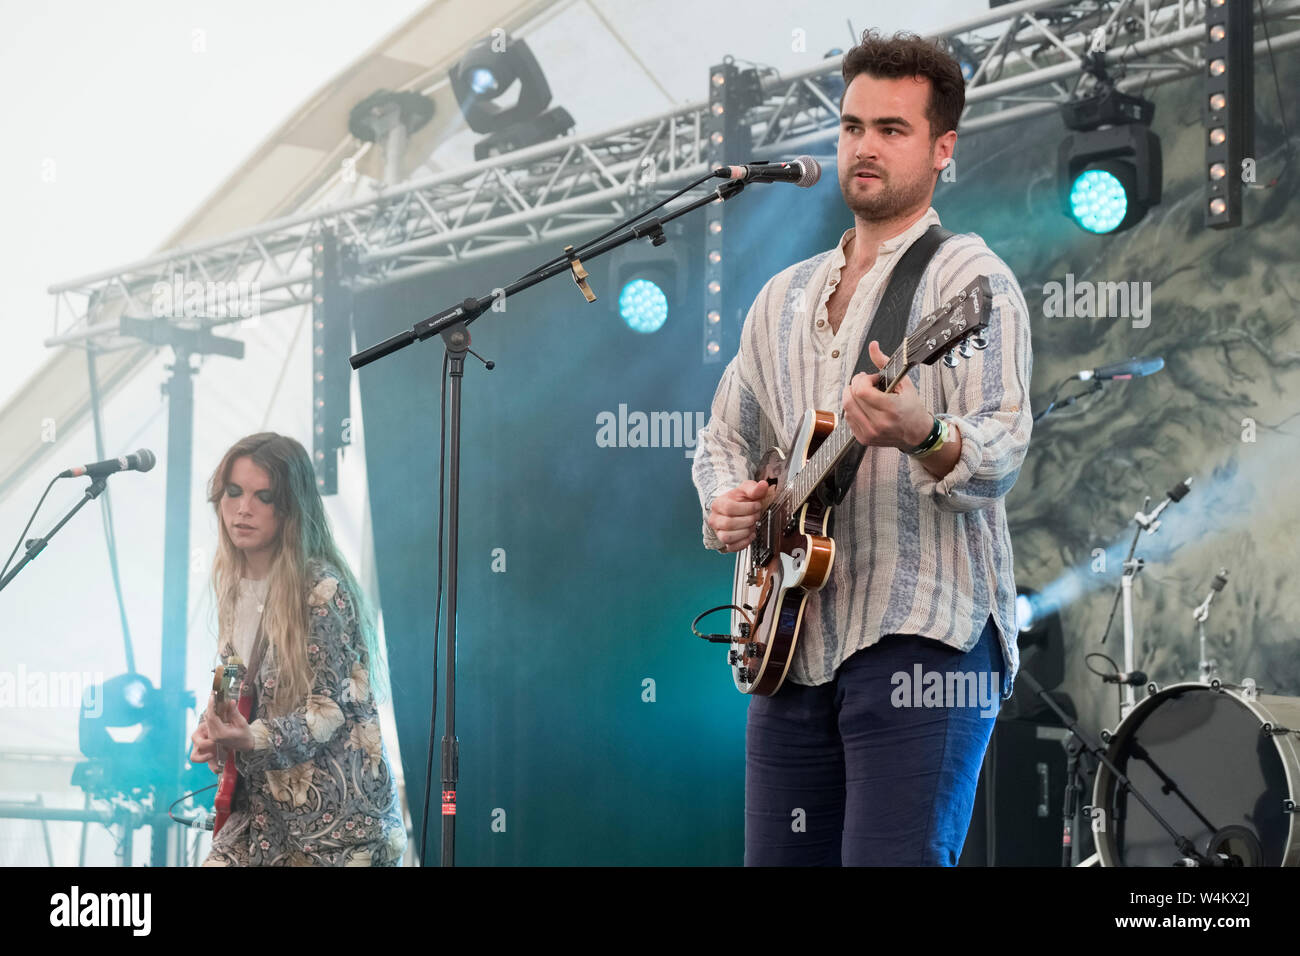 Ferris and Sylvester performing at The Larmer Tree Festival, UK. July 21, 2019 Stock Photo